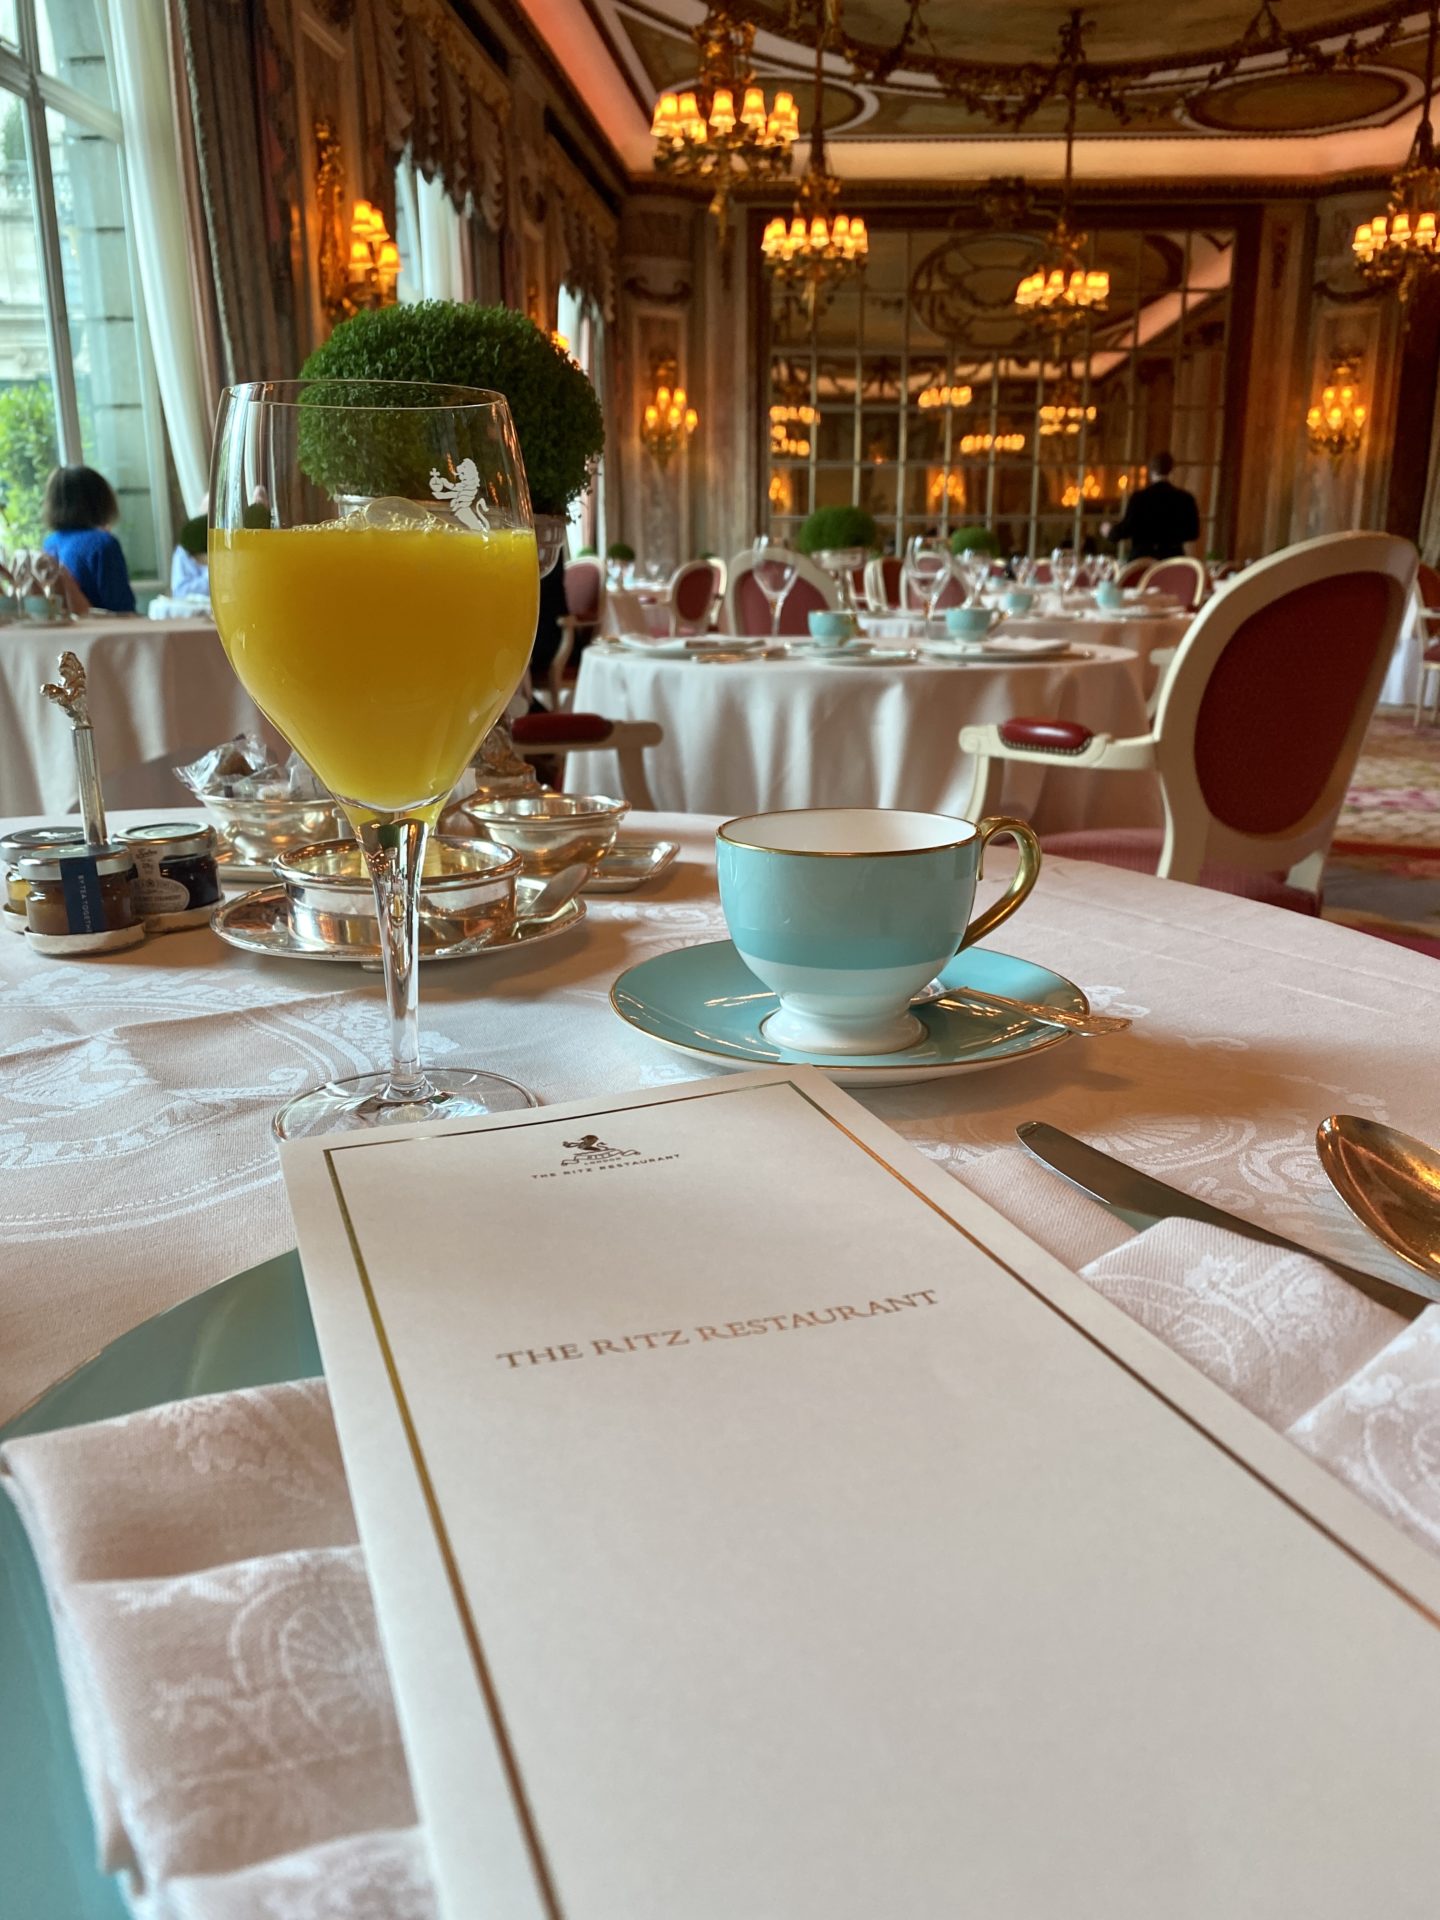 Breakfast in the dinning room at the ritz hotel London 